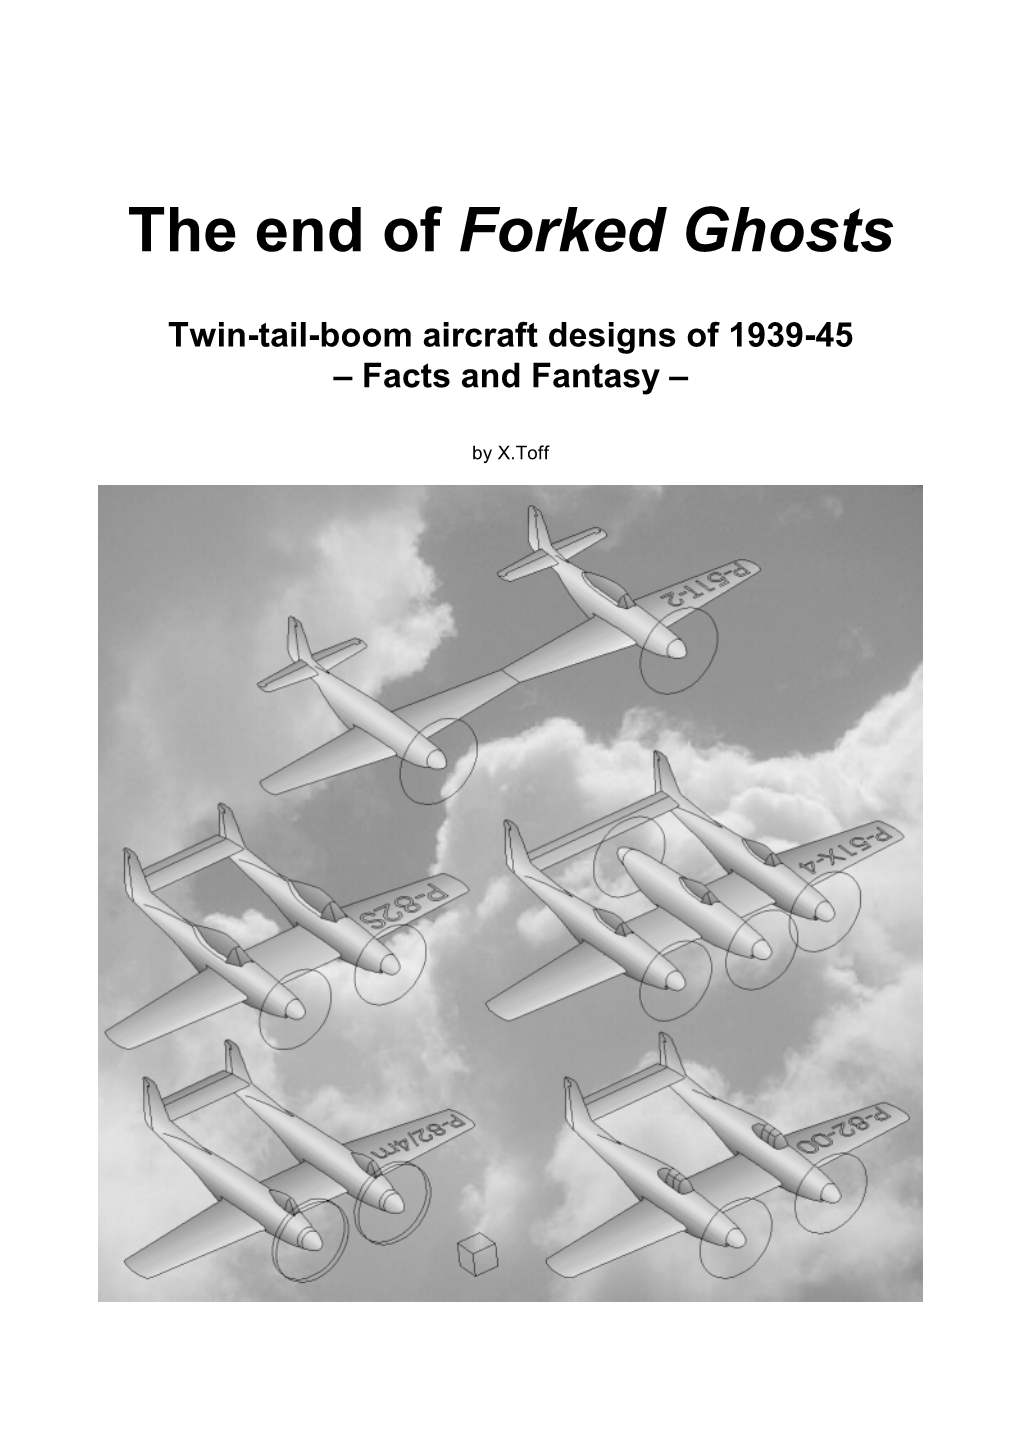 The End of Forked Ghosts